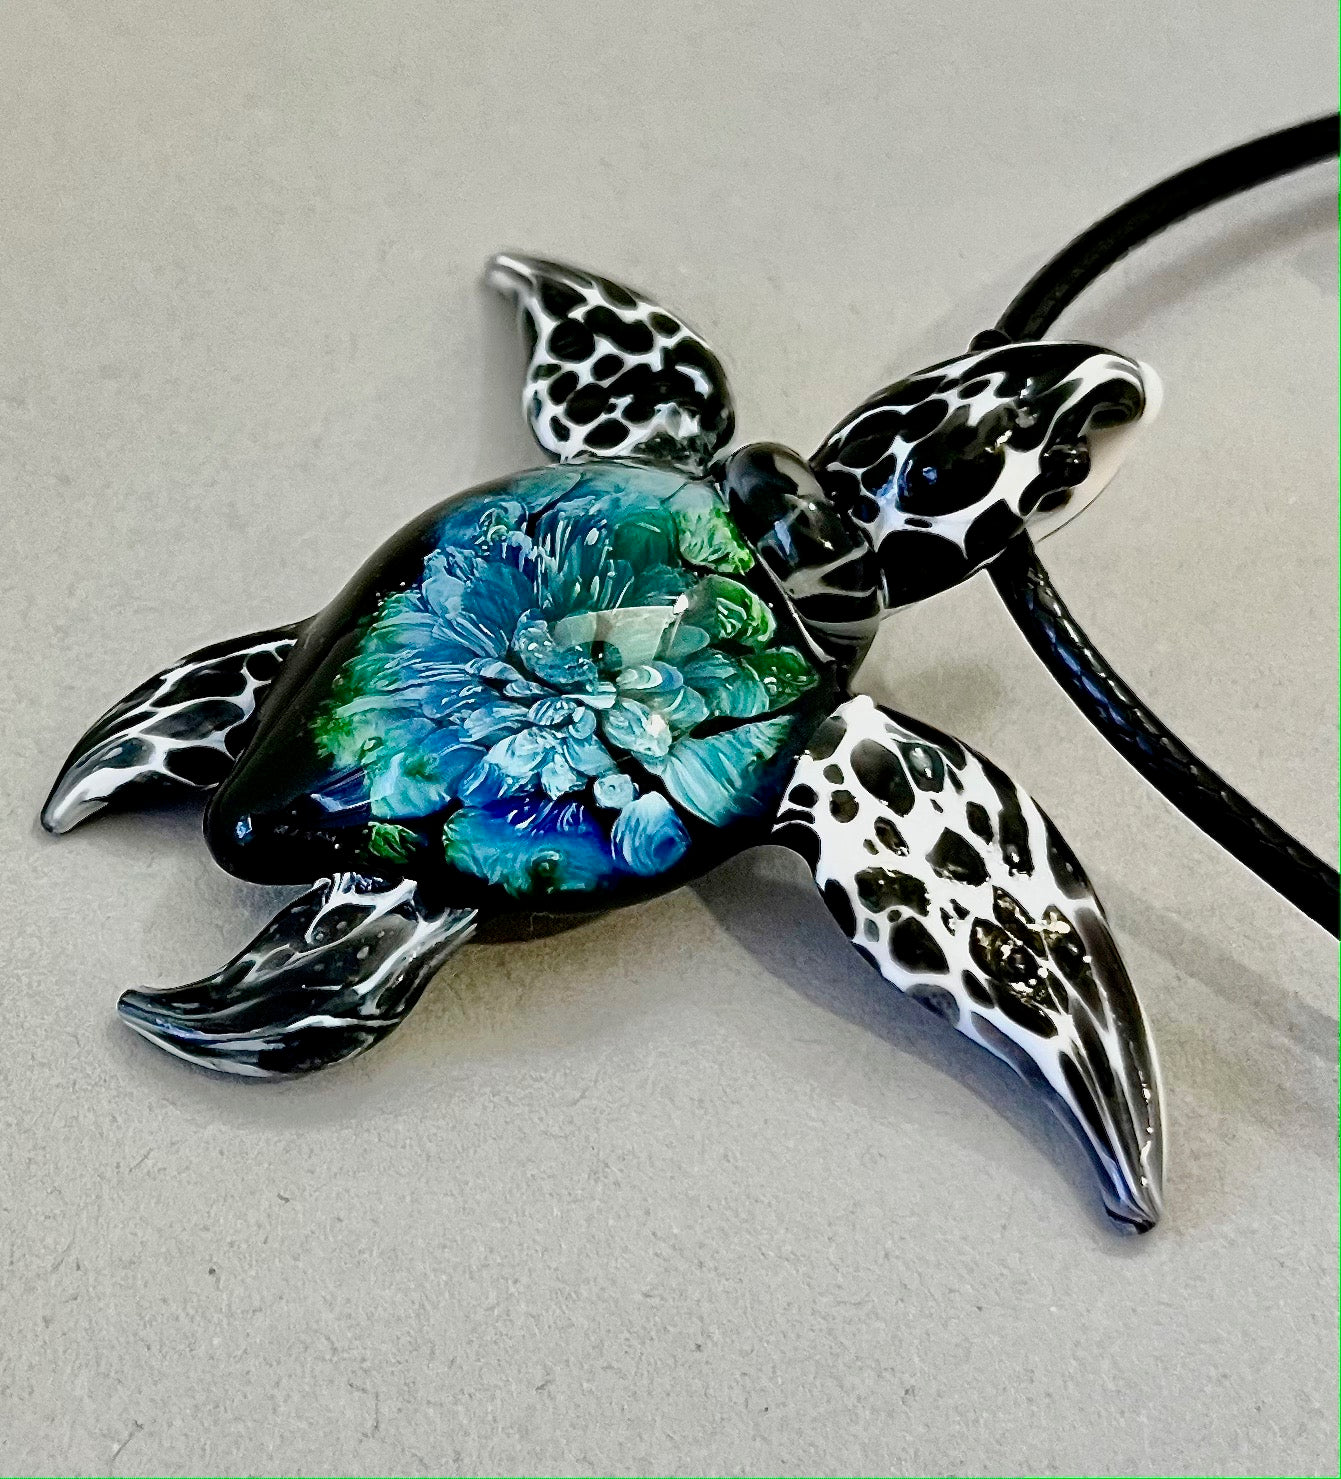 glass black and white spotted sea turtle pendant with iceberg style explosion in the shell at a 45 degree angle.